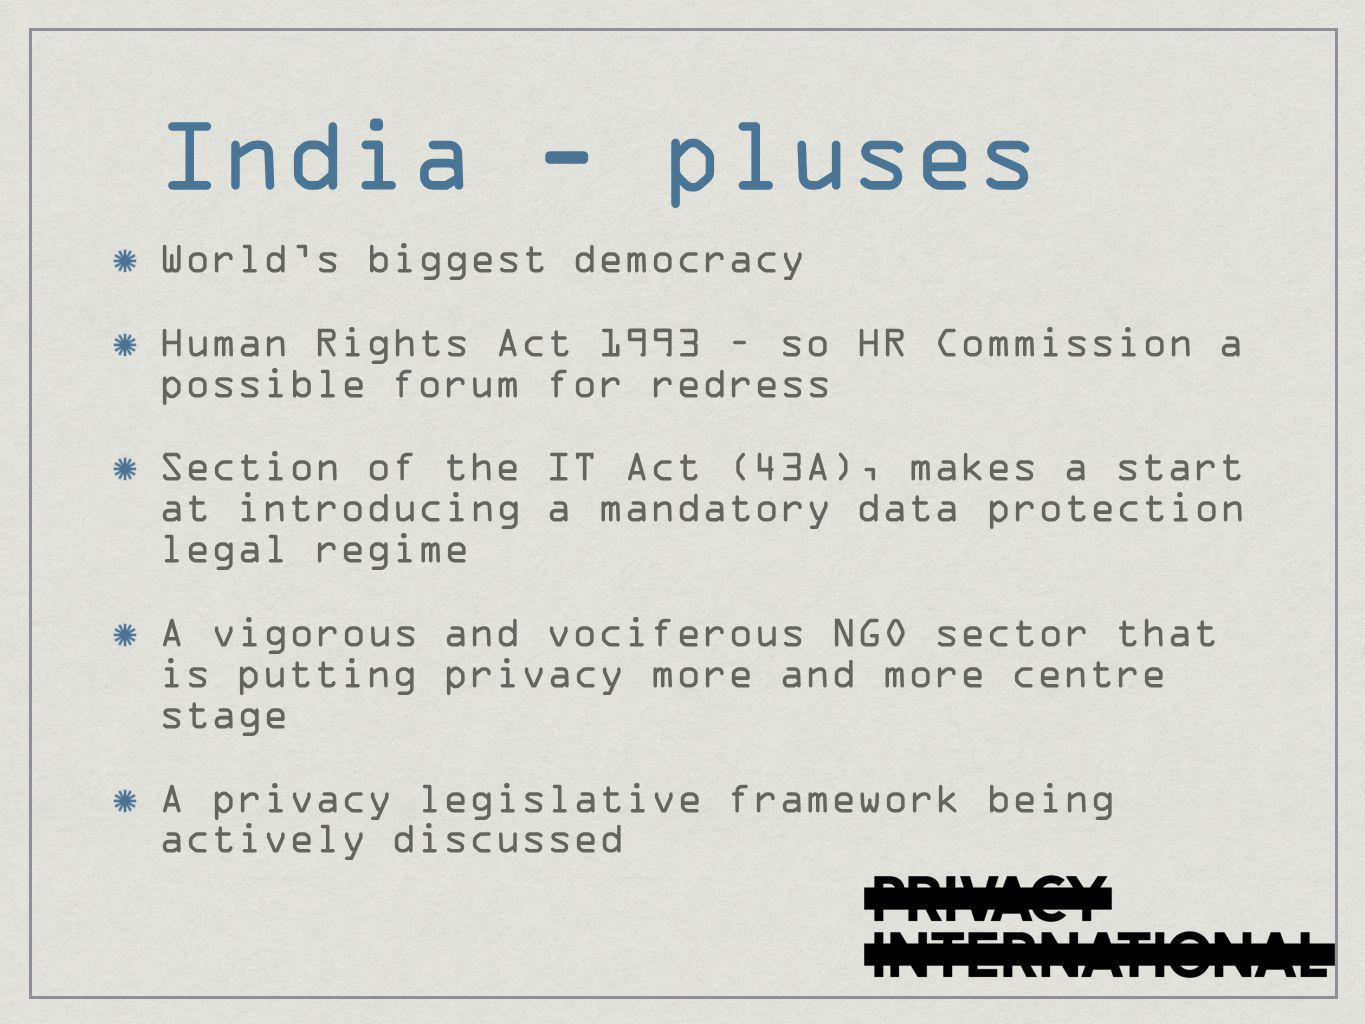 India - pluses World’s biggest democracy Human Rights Act 1993 – so HR Commission a possible forum for redress Section of the IT Act (43A), makes a start at introducing a mandatory data protection legal regime A vigorous and vociferous NGO sector that is putting privacy more and more centre stage A privacy legislative framework being actively discussed